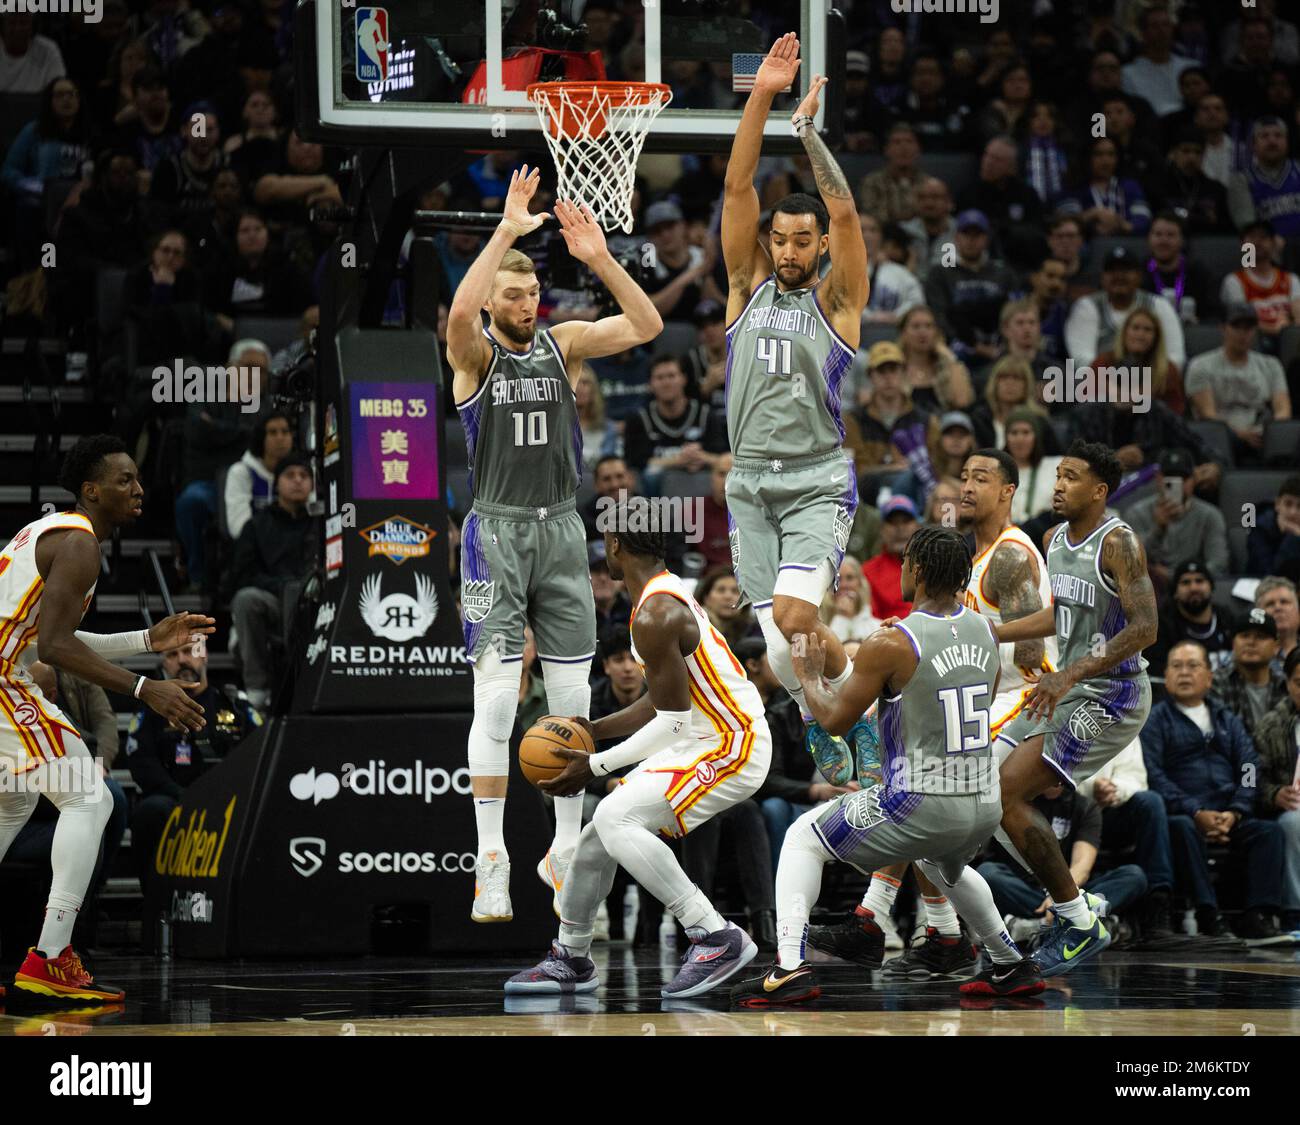 Sacramento, CA, USA. 9th Feb, 2022. Sacramento Kings center Domantas Sabonis  (13) reacts after basket in the fourth quarter during a game at Golden 1  Center on Wednesday, Feb. 9, 2022 in